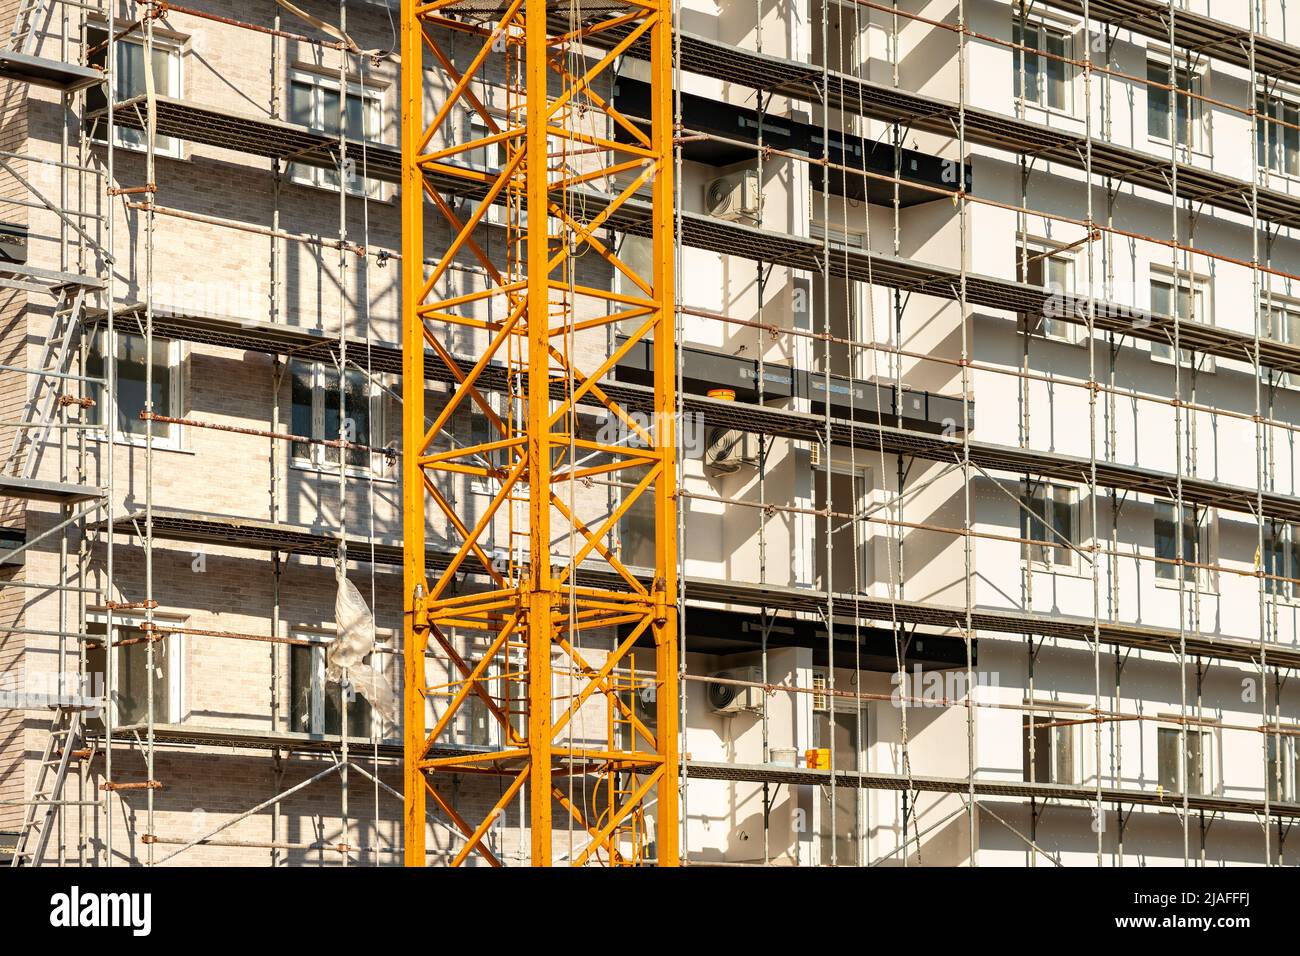 Real estate development, residential apartment building construction site with scaffolding Stock Photo